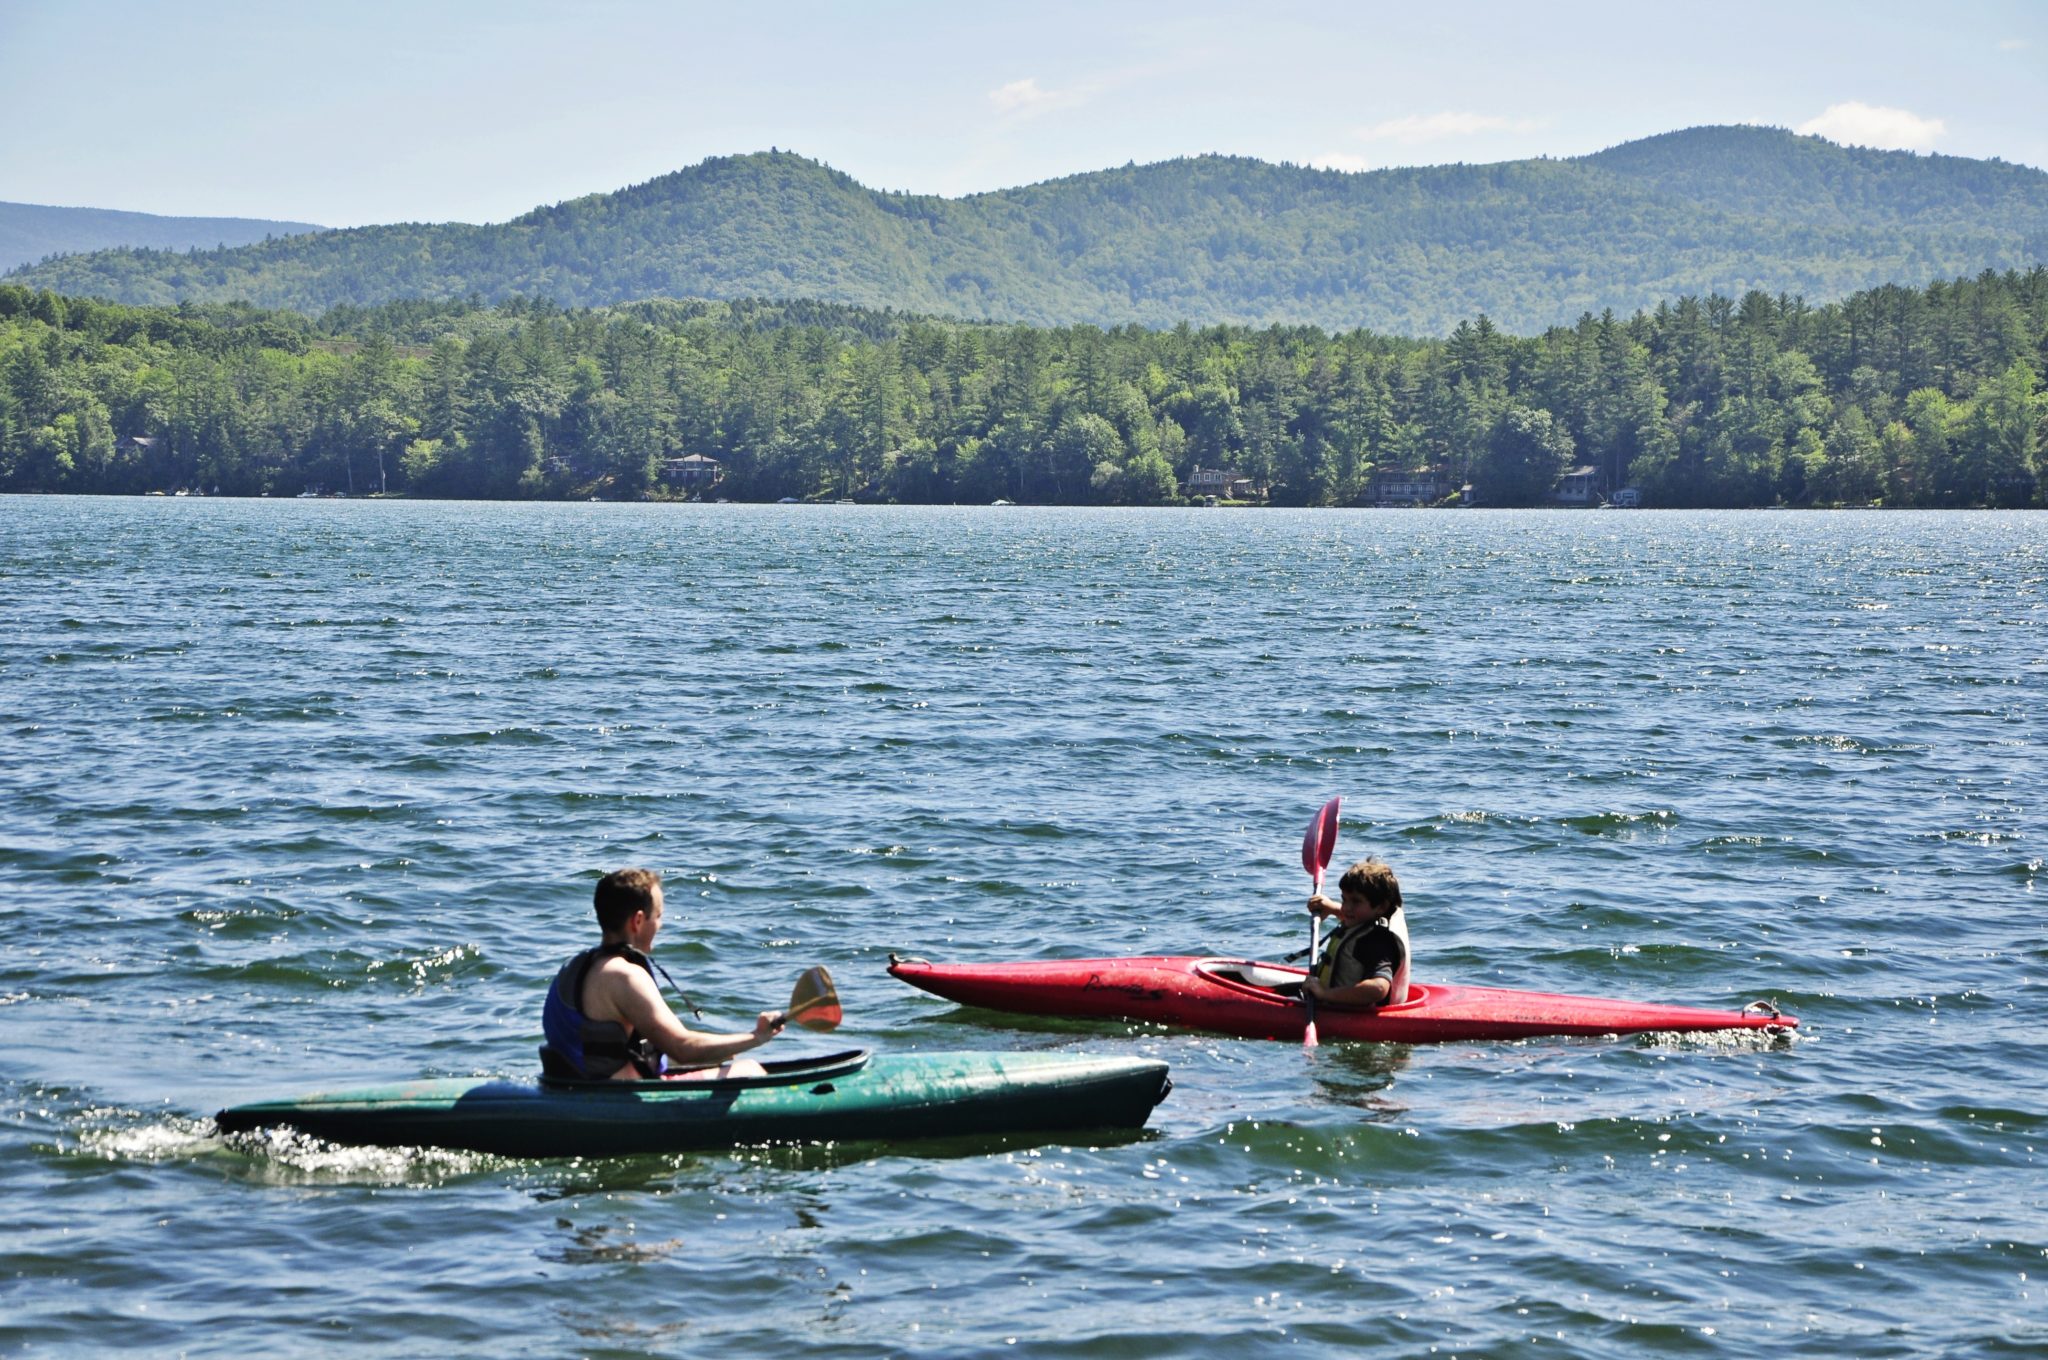 Two people in kayaks out on the lake with the green mountains in the background.